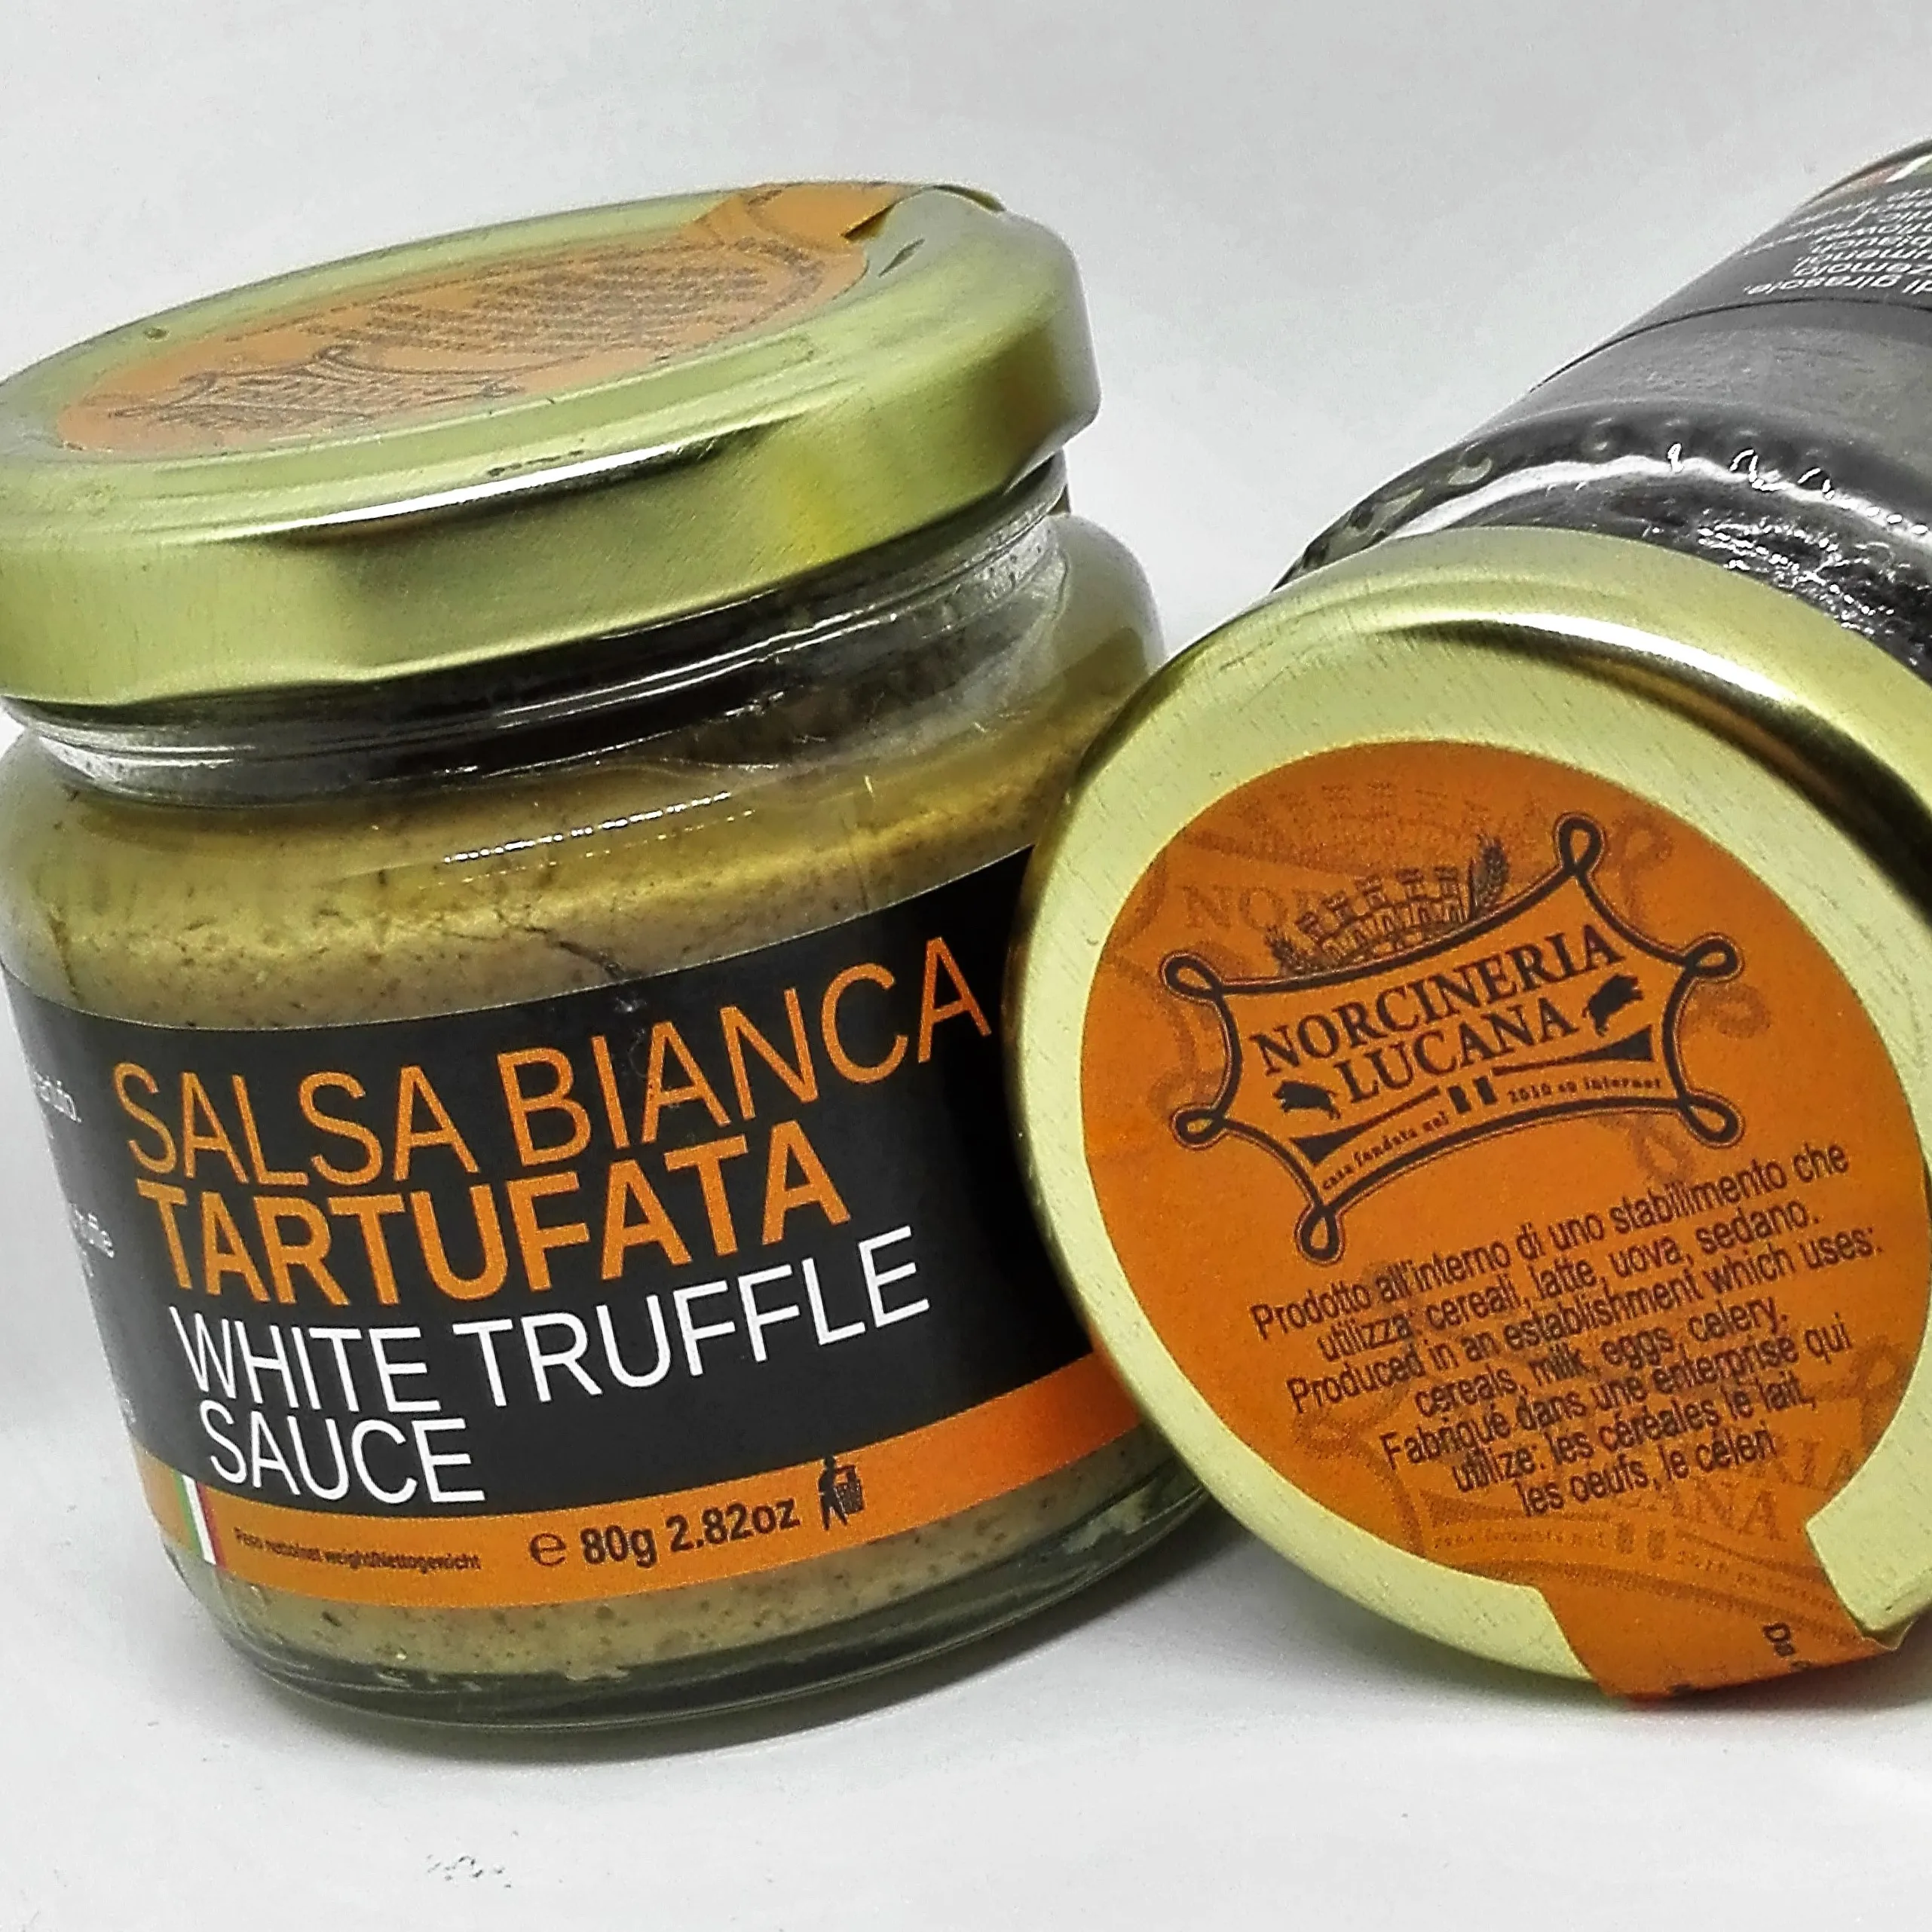 white truffle souce spread made in Italy customizable label no MOQ NORCINERIA LUCANA BRAND